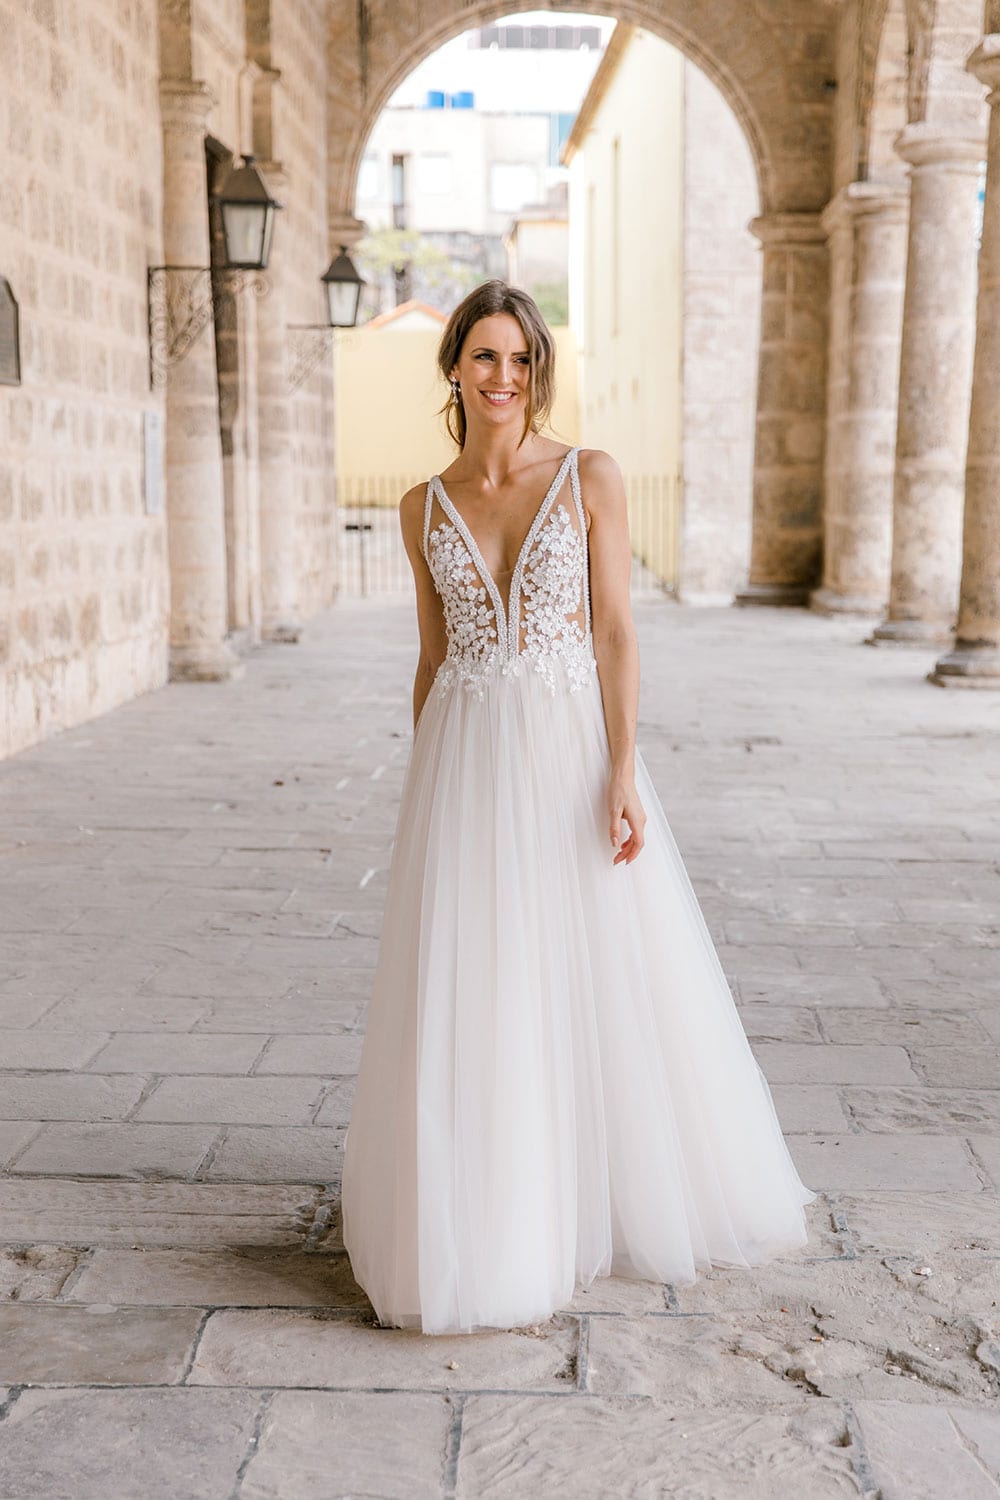 Model wearing Vinka Design Isabel Wedding Dress, a Champagne coloured Tulle Gown with Sheer V-Neck Bodice and Beaded Lace in the archway of an old building in Havana